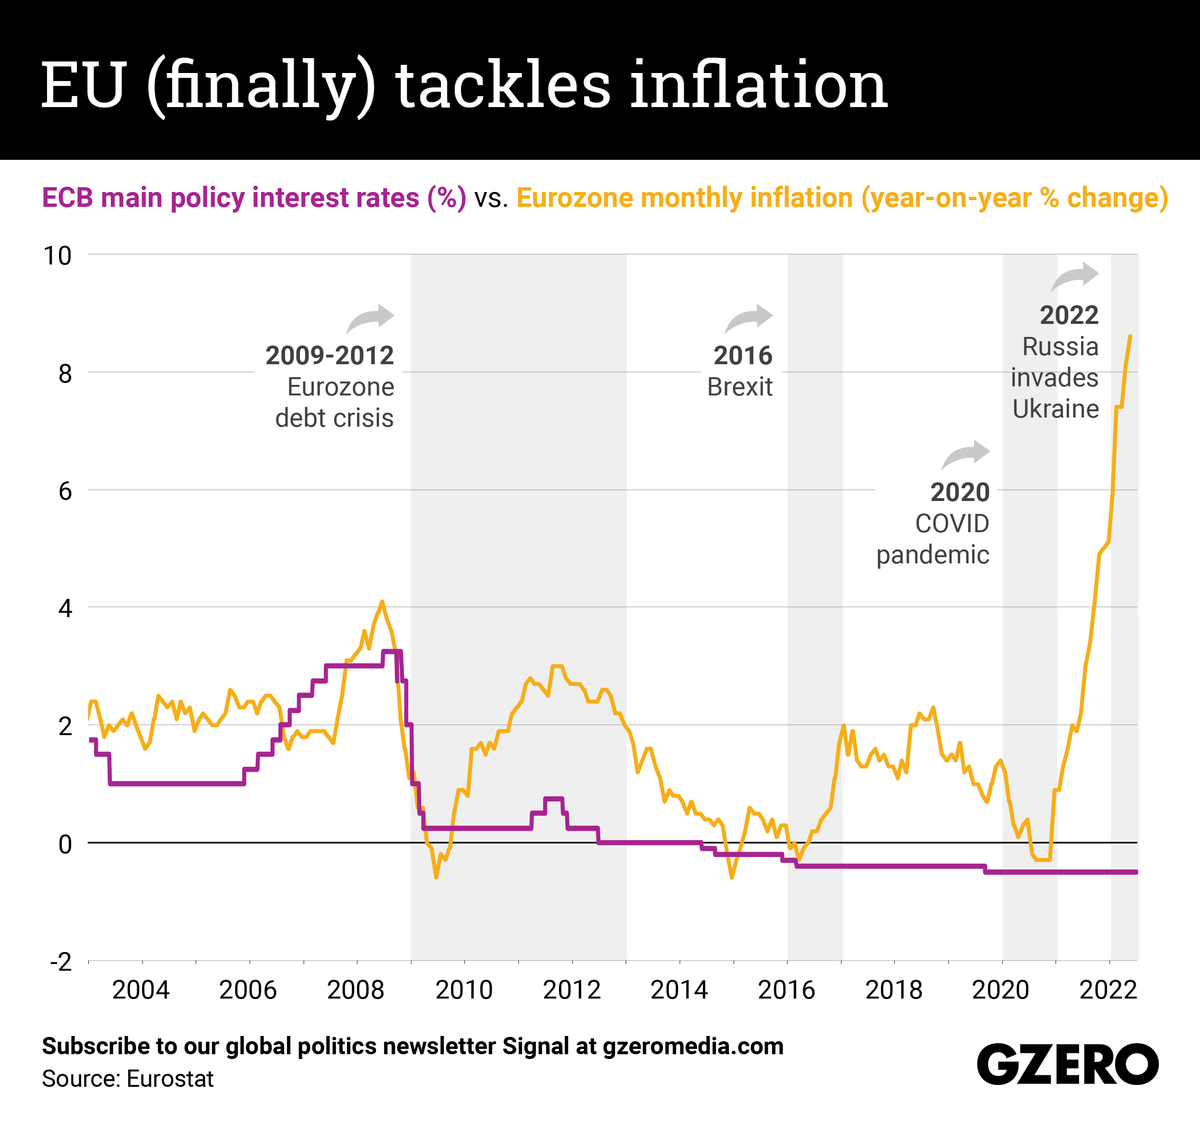 The Graphic Truth: EU (finally) tackles inflation